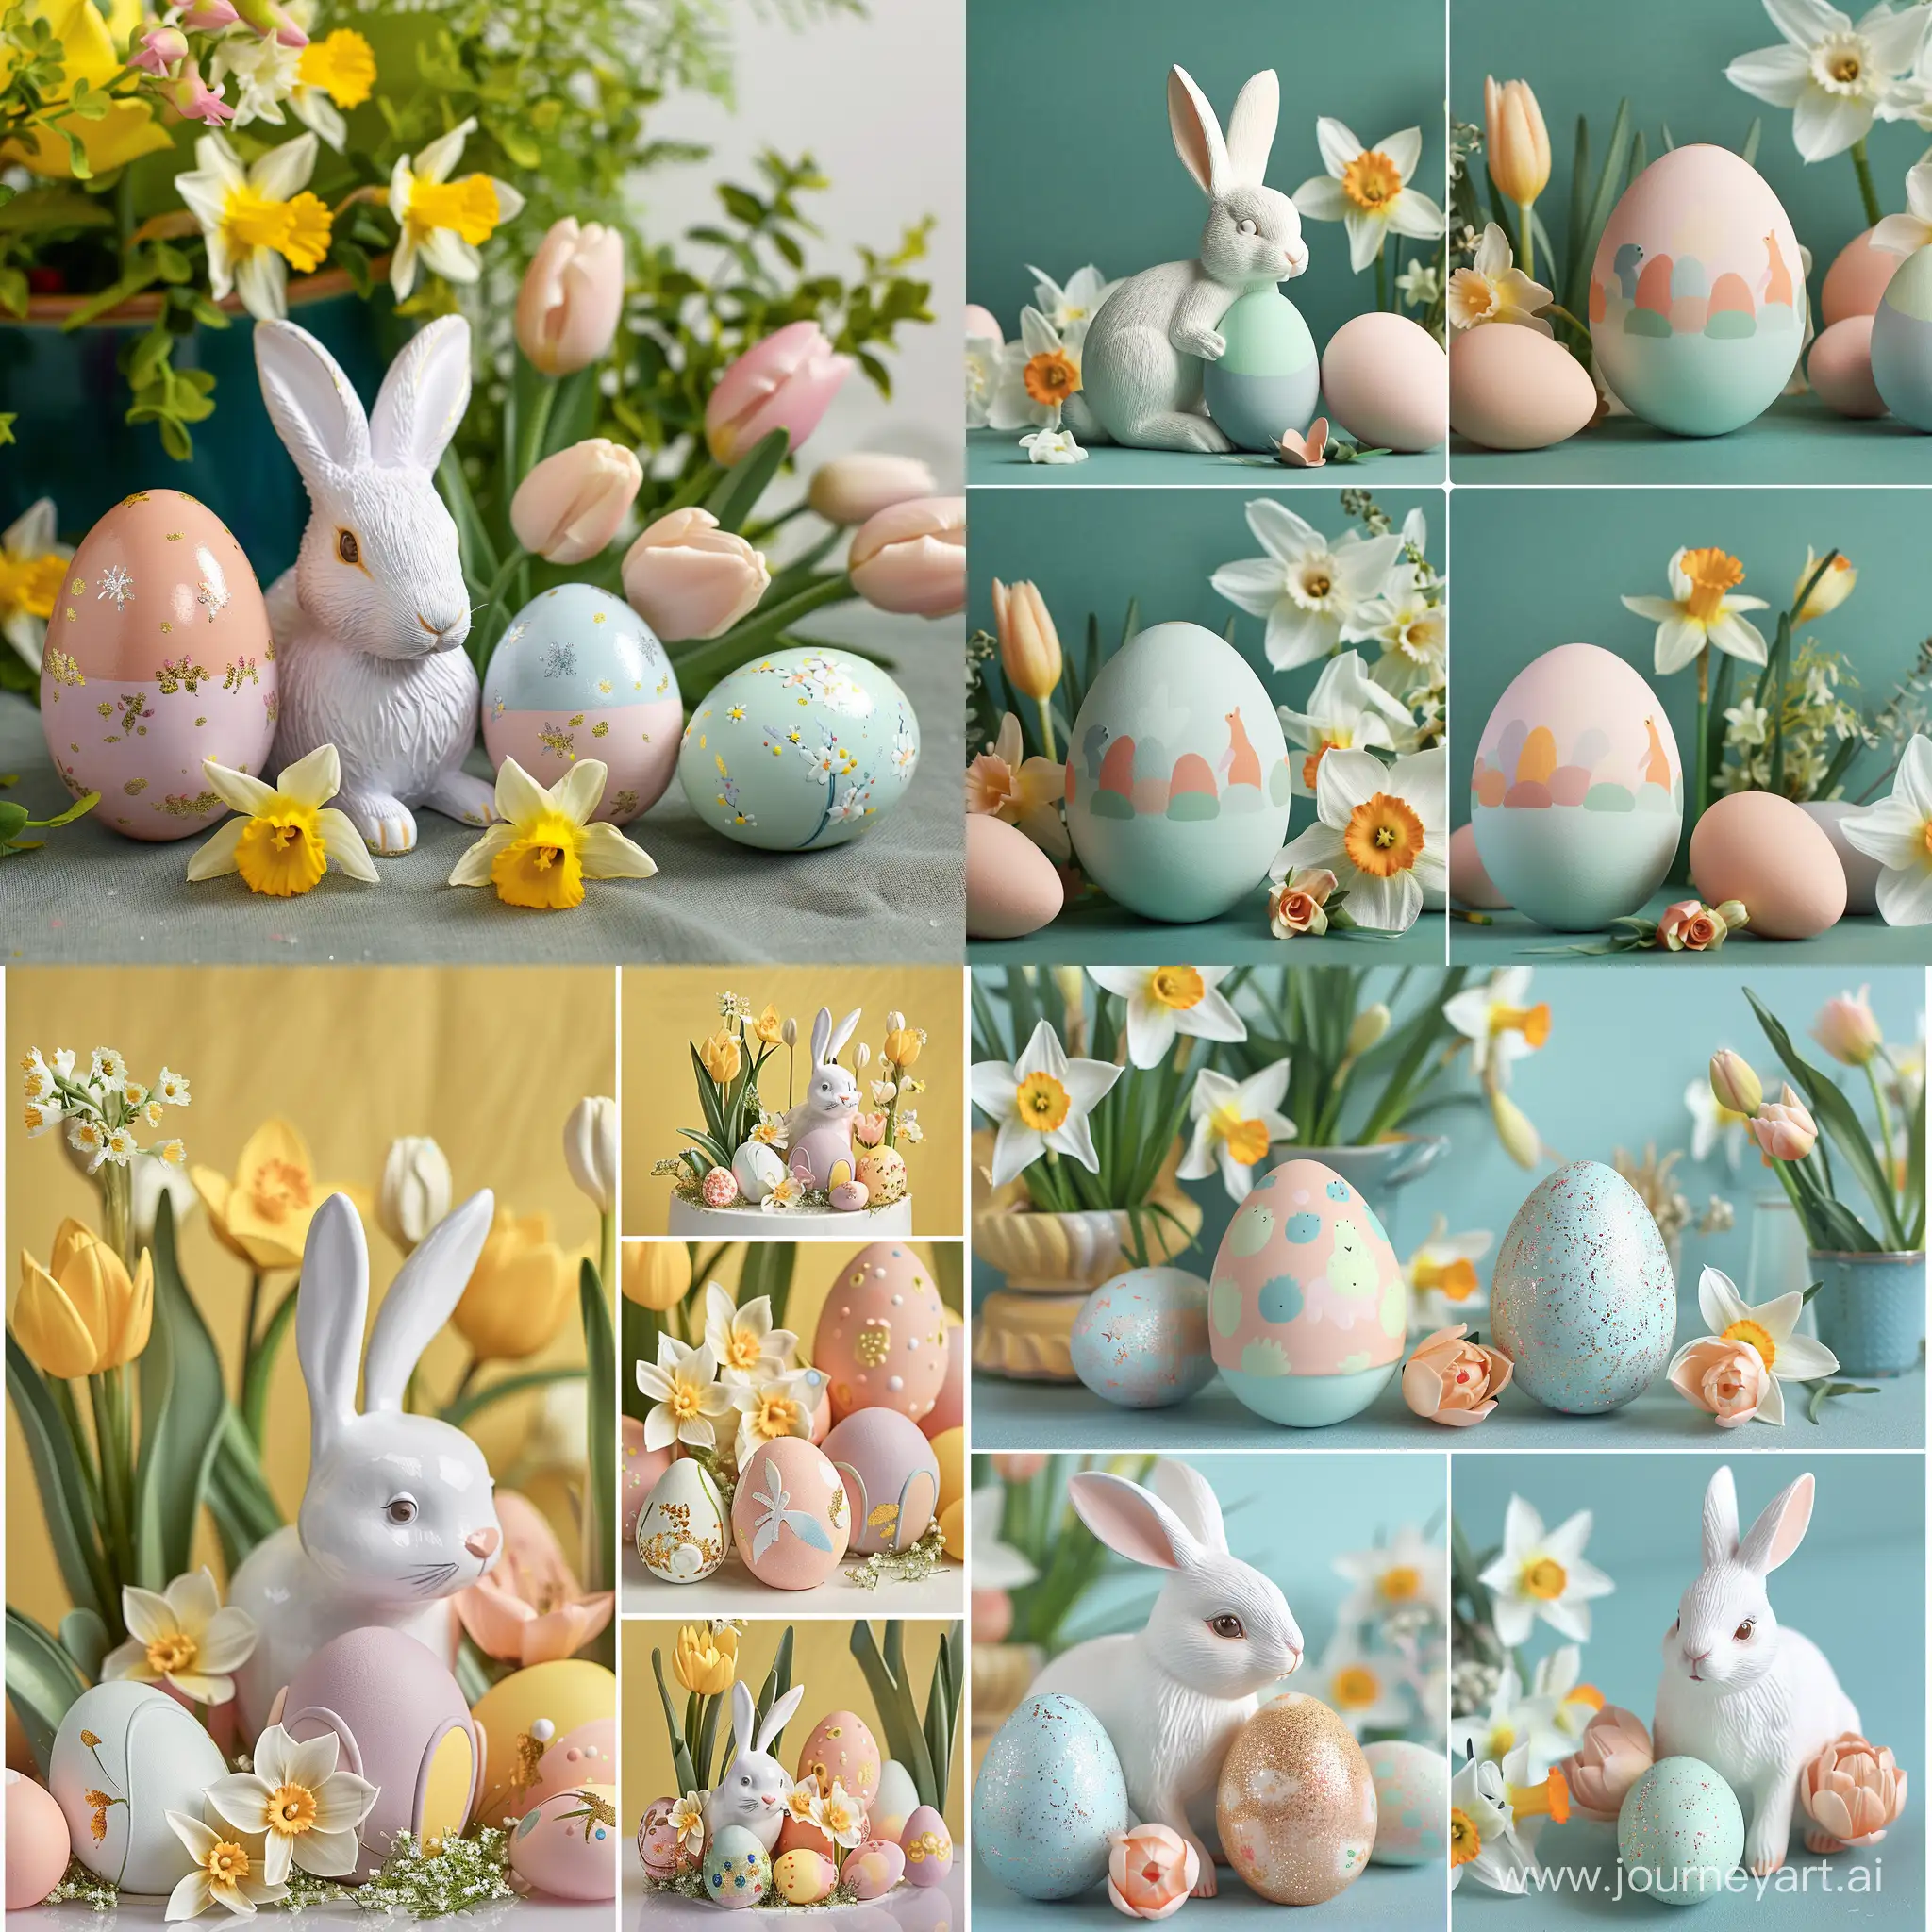 Create an enchanting scene with pastel-painted eggs in the latest Pantone 2024 colors. Showcase the intricate details with multiple angles, incorporating the charm of a playful Easter bunny and the freshness of spring flowers like tulips and narcissus